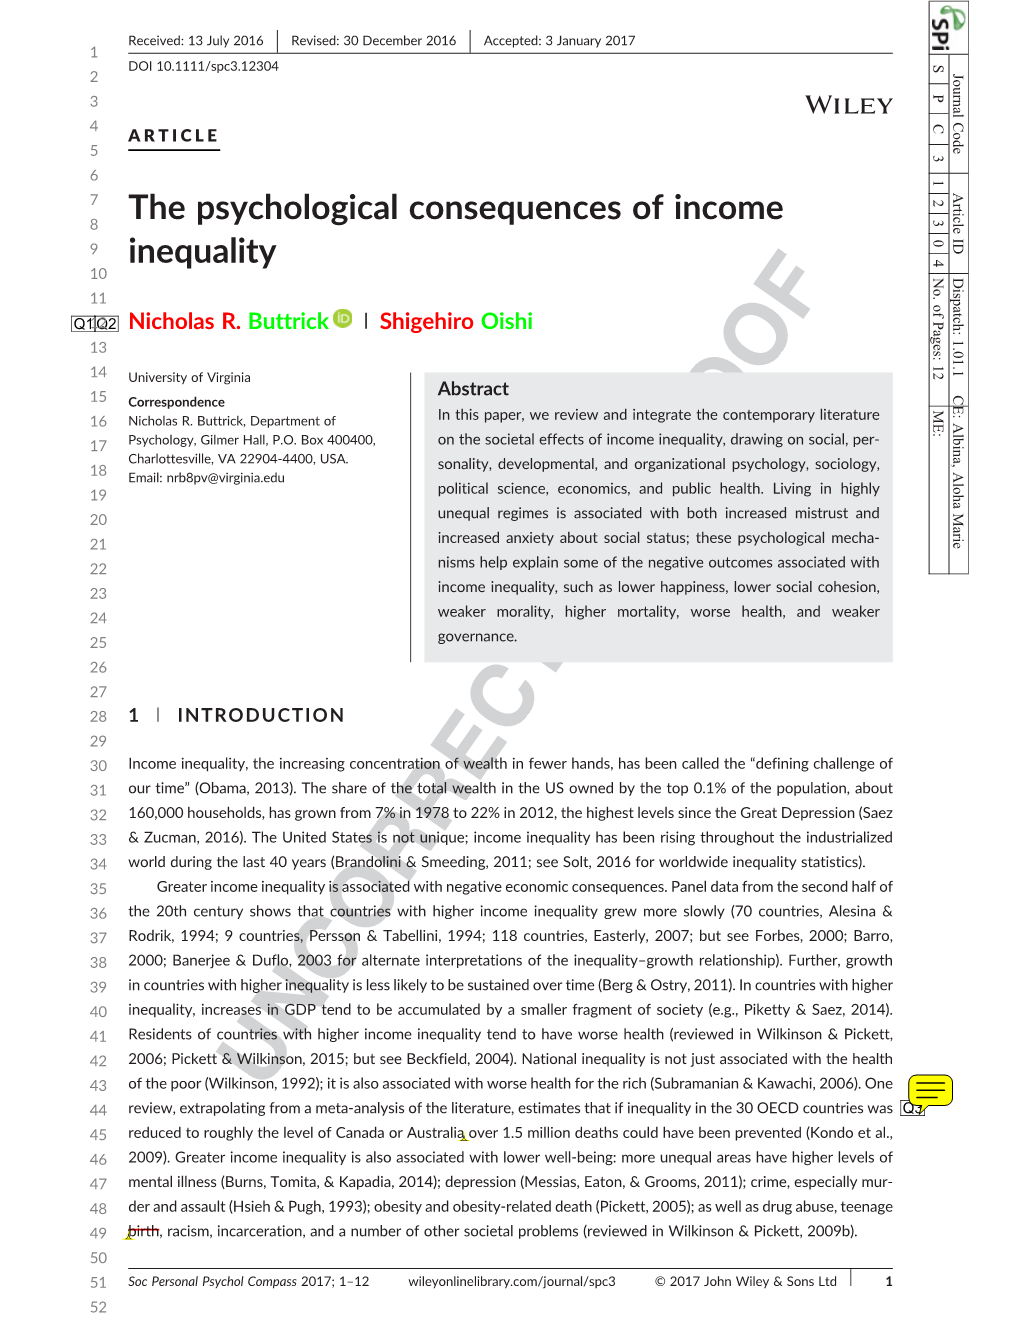 The Psychological Consequences of Income Inequality